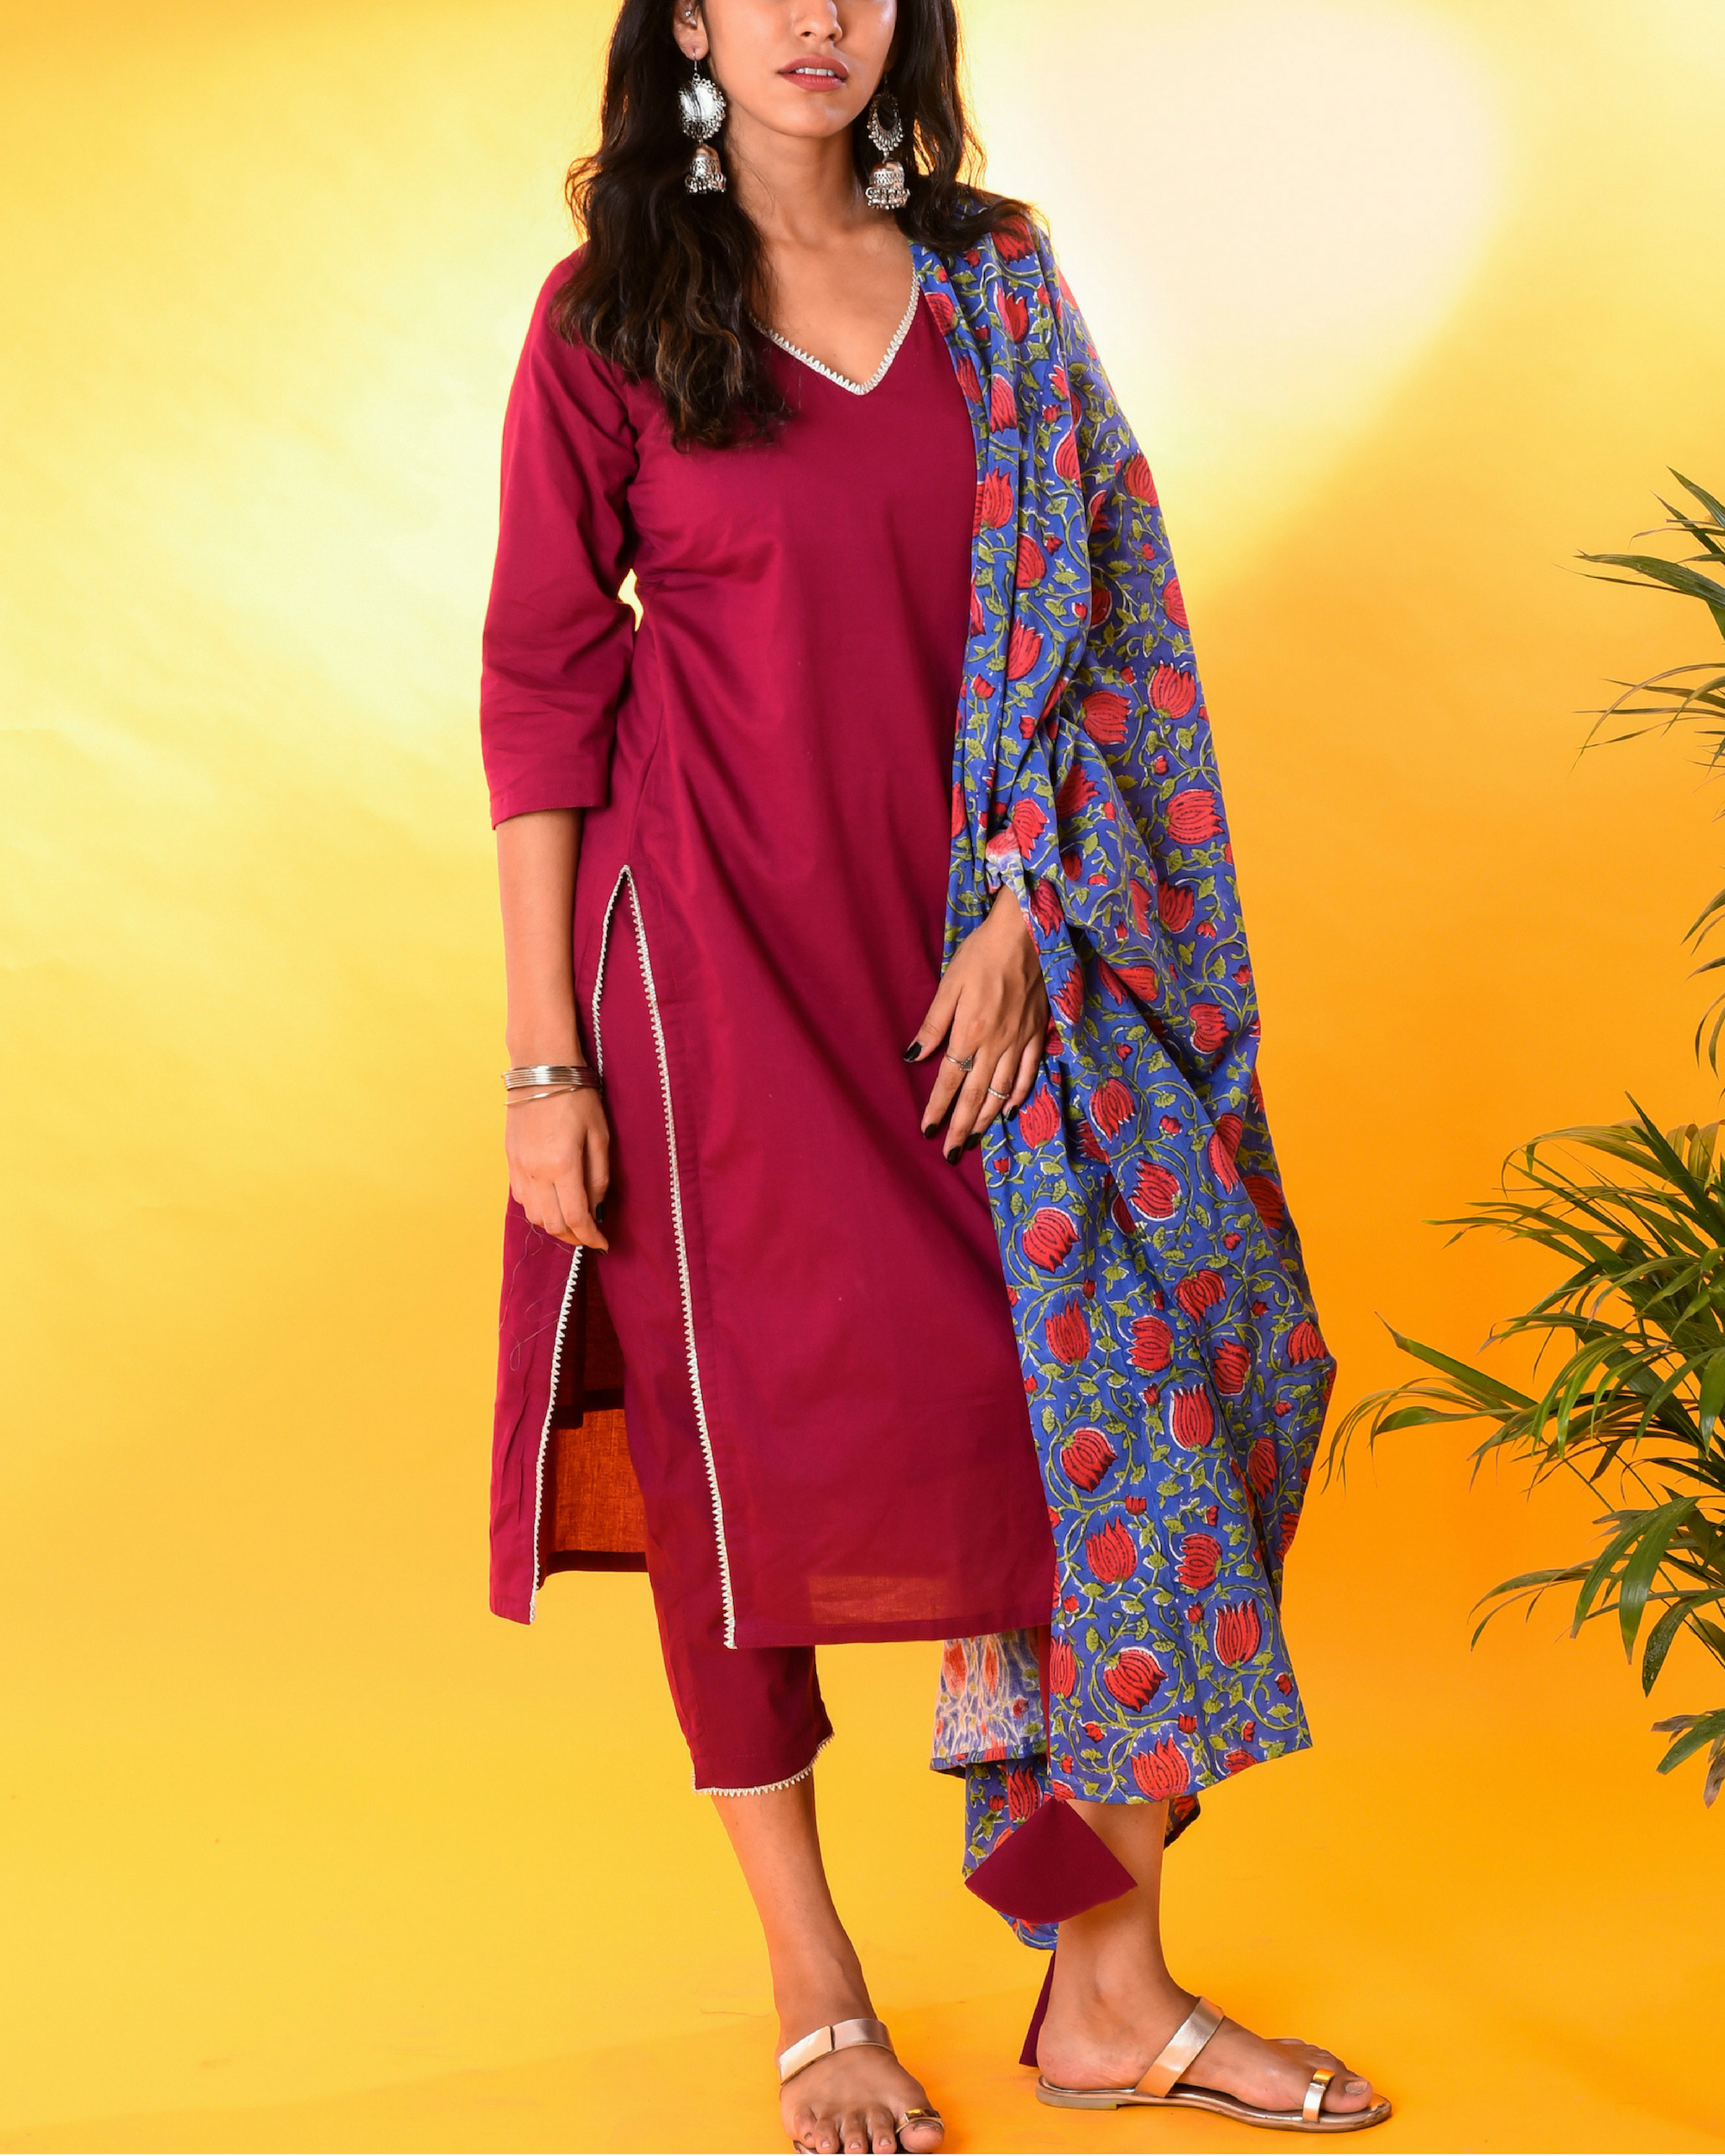 Outstanding Cotton Pant Style Straight Salwar Kameez